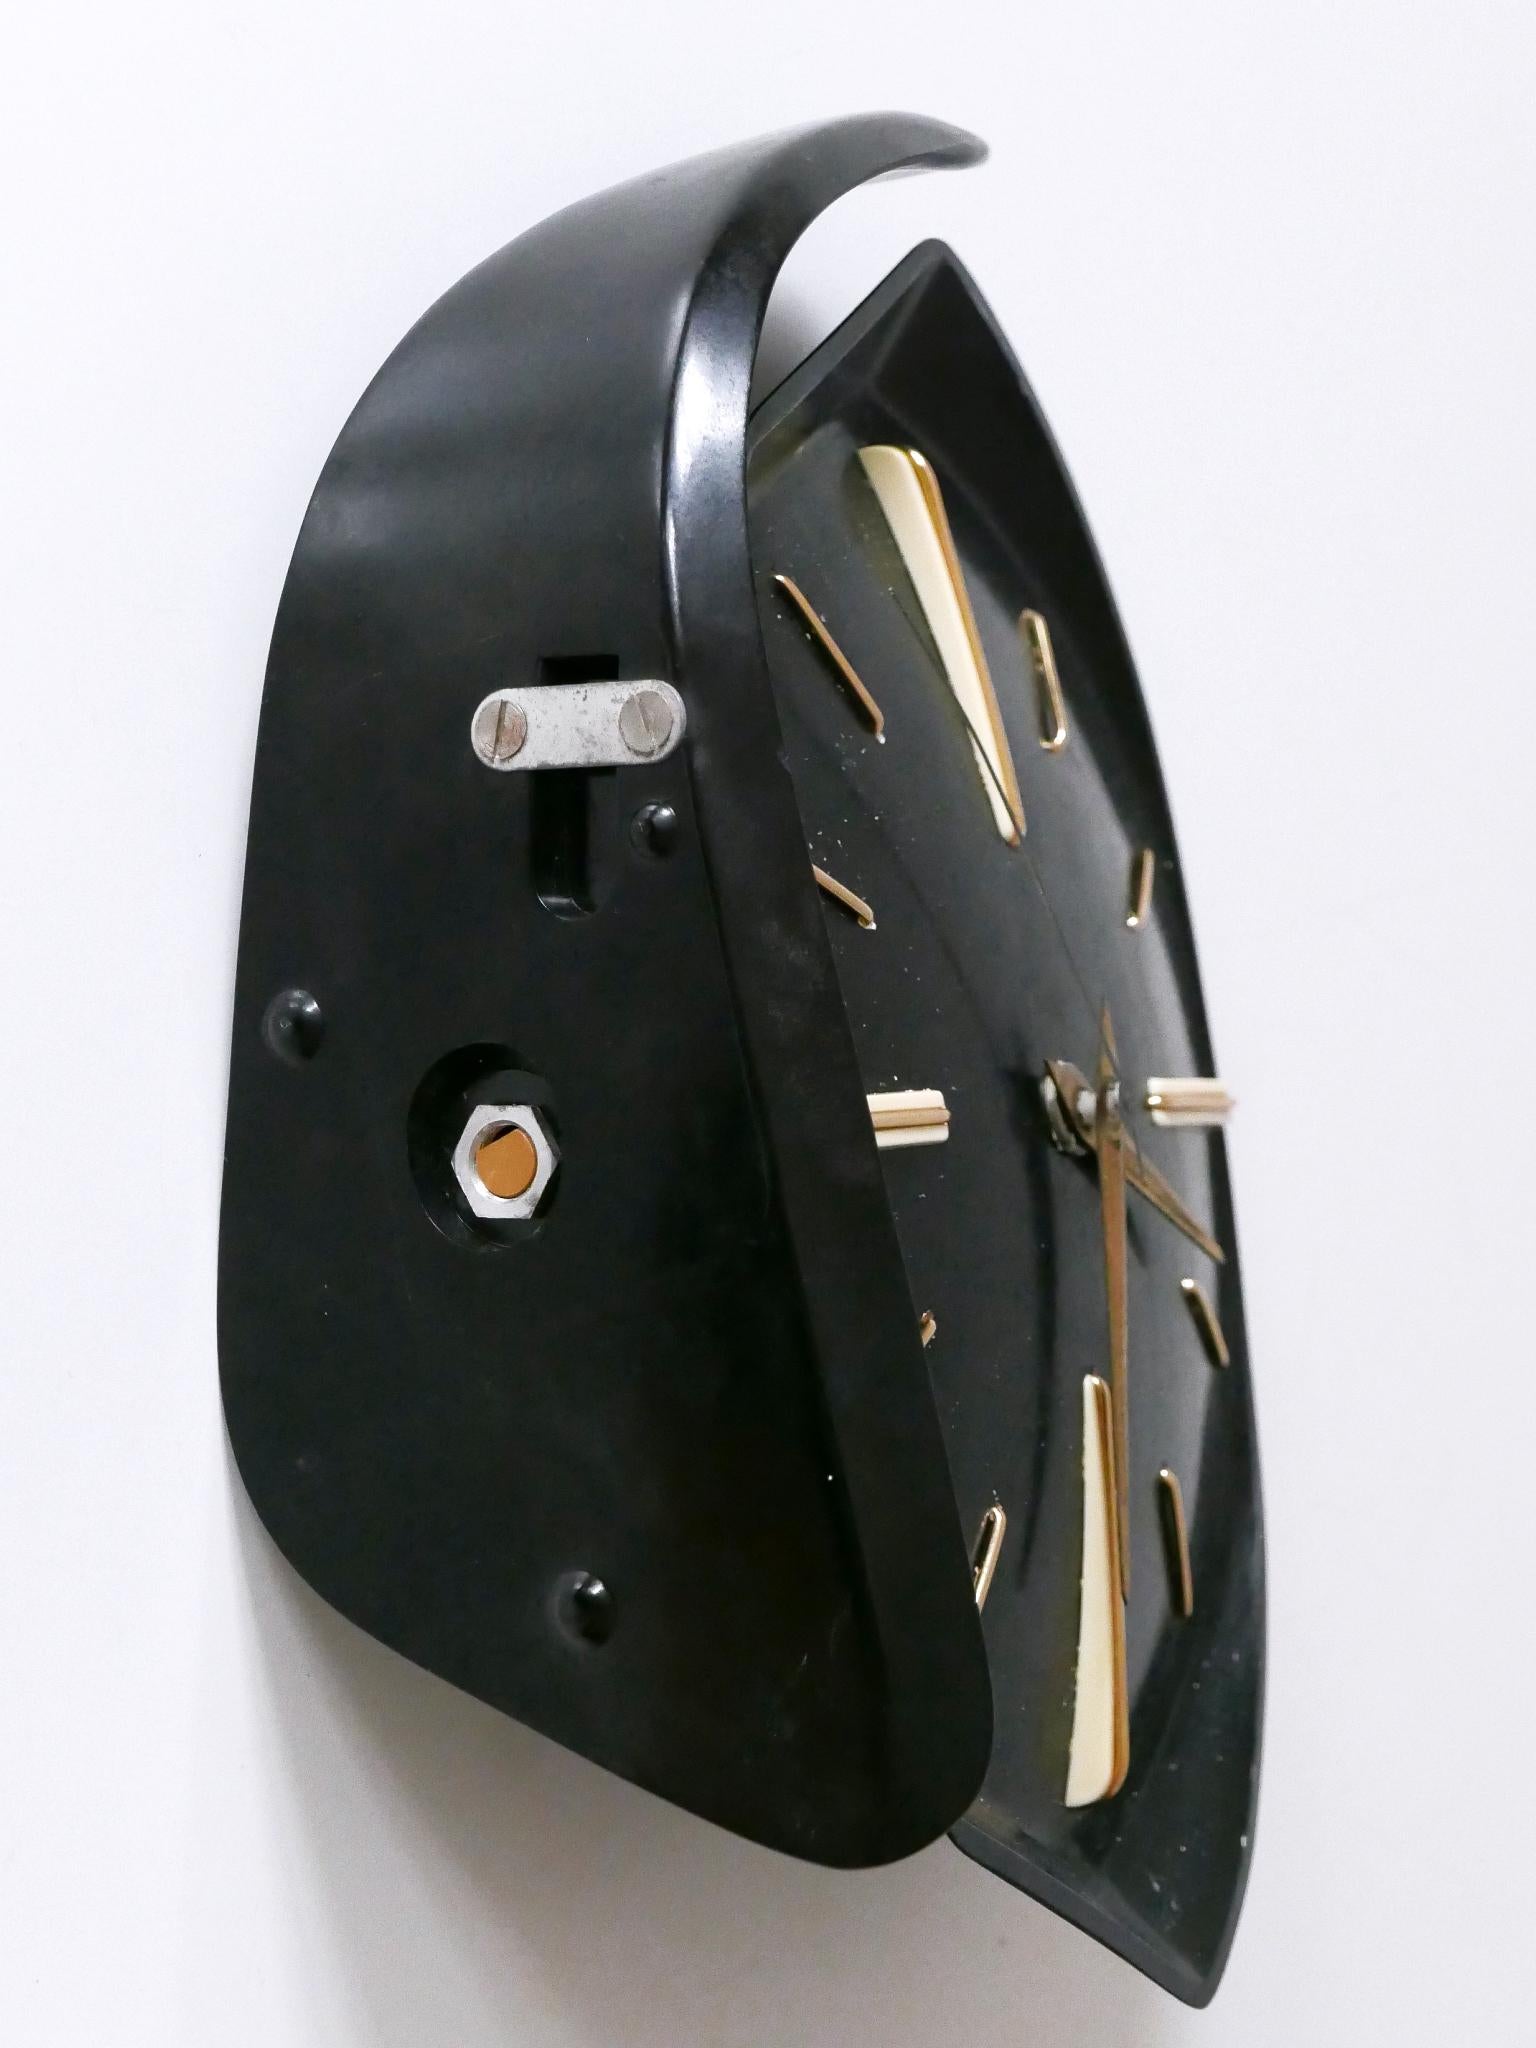 Rare and Lovely Mid-Century Modern Bakelite Table or Wall Clock by PRIM 1950s For Sale 10